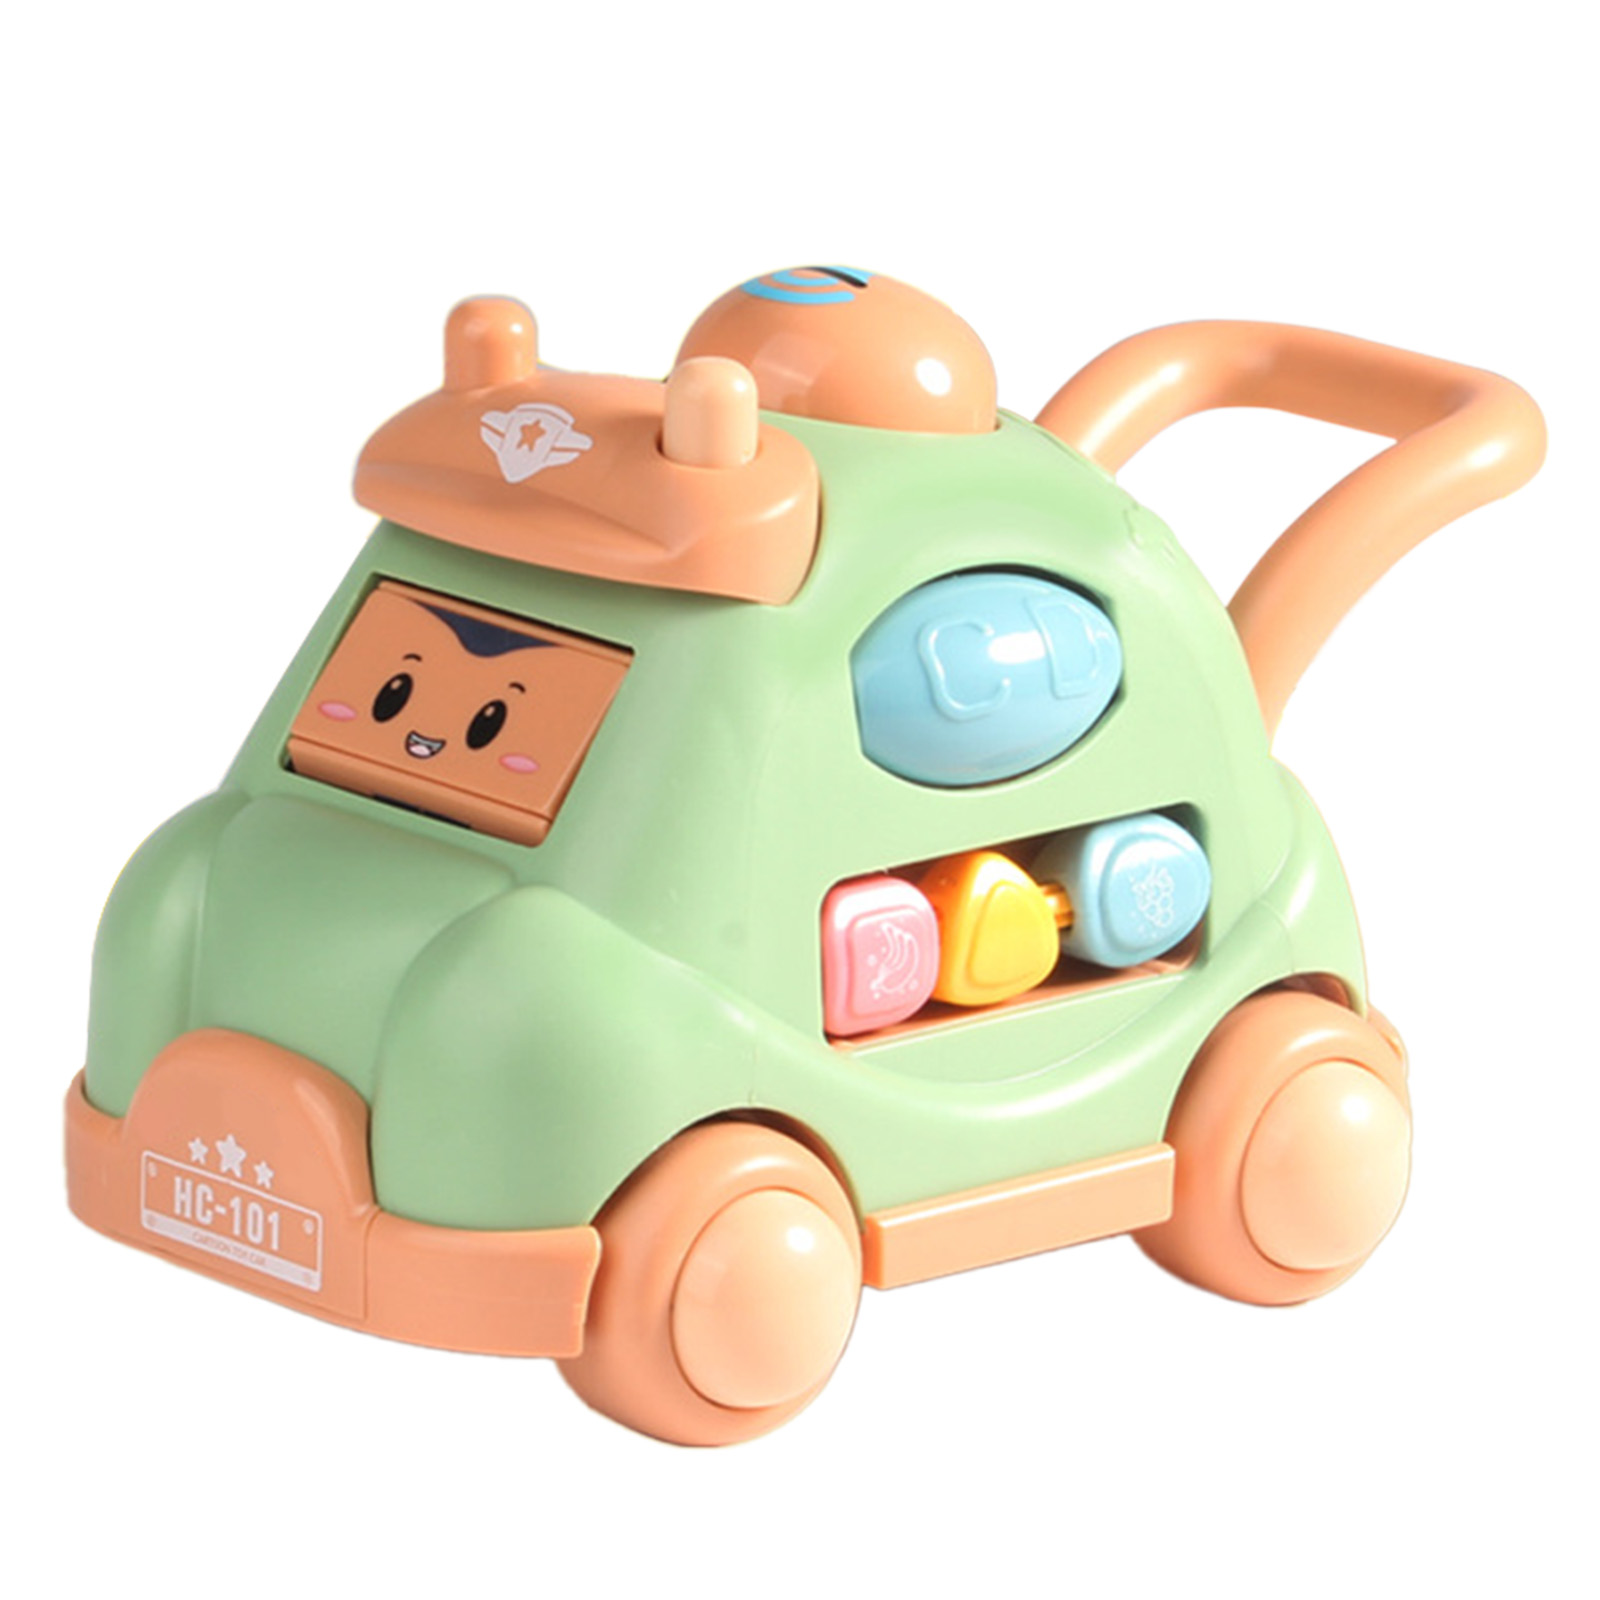 Inertia Car Toy For Kids Cartoon Face Changing Car Toy With Visible Colored Moving Gears Light Music Effects For Birthday Christmas Gifts